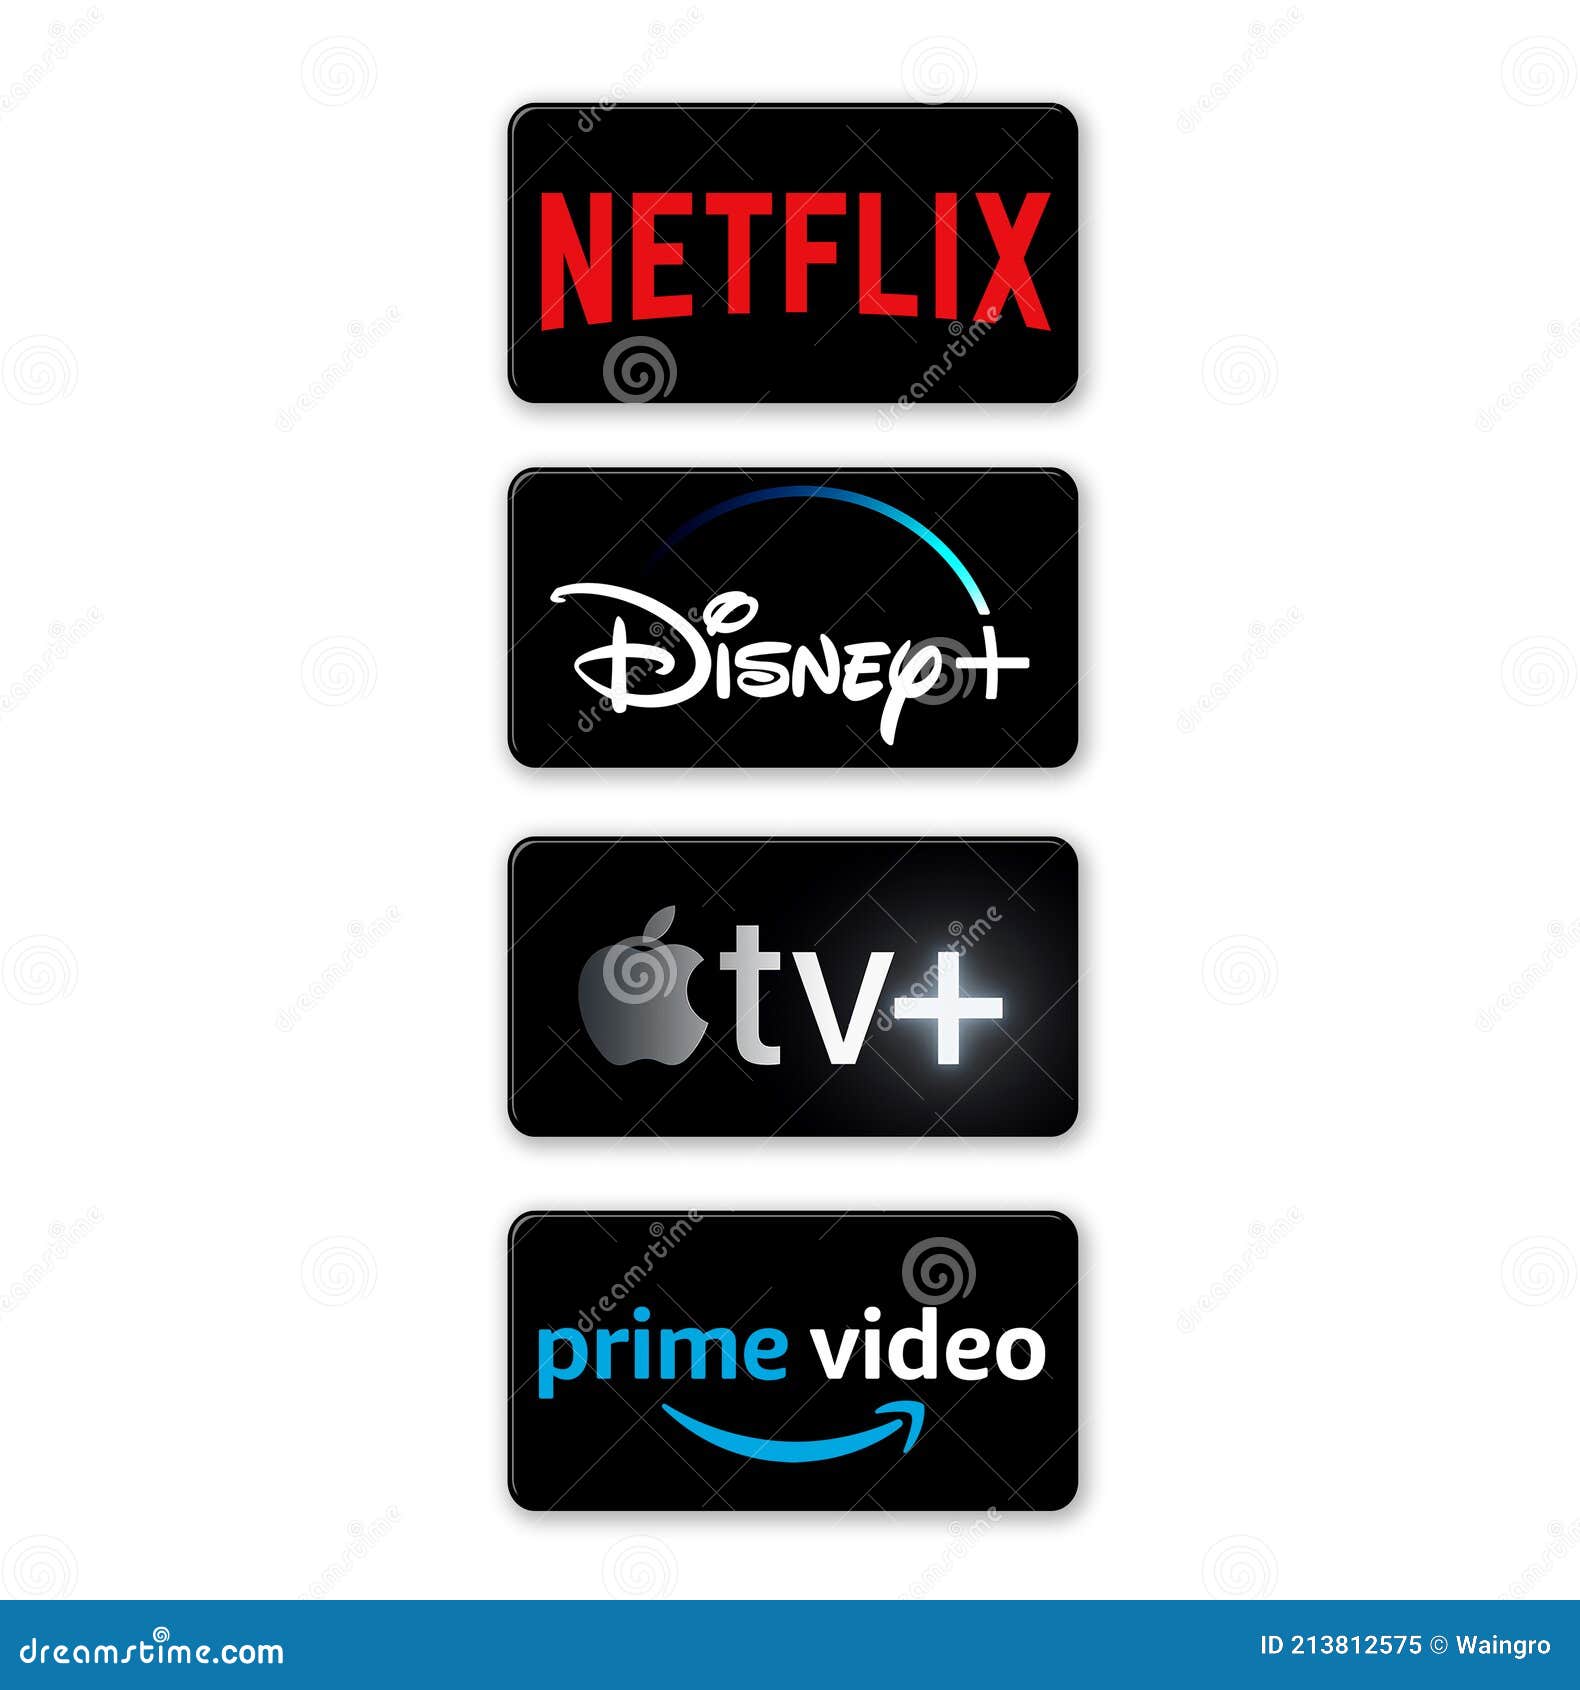 Video on Demand Streaming Services Editorial Image